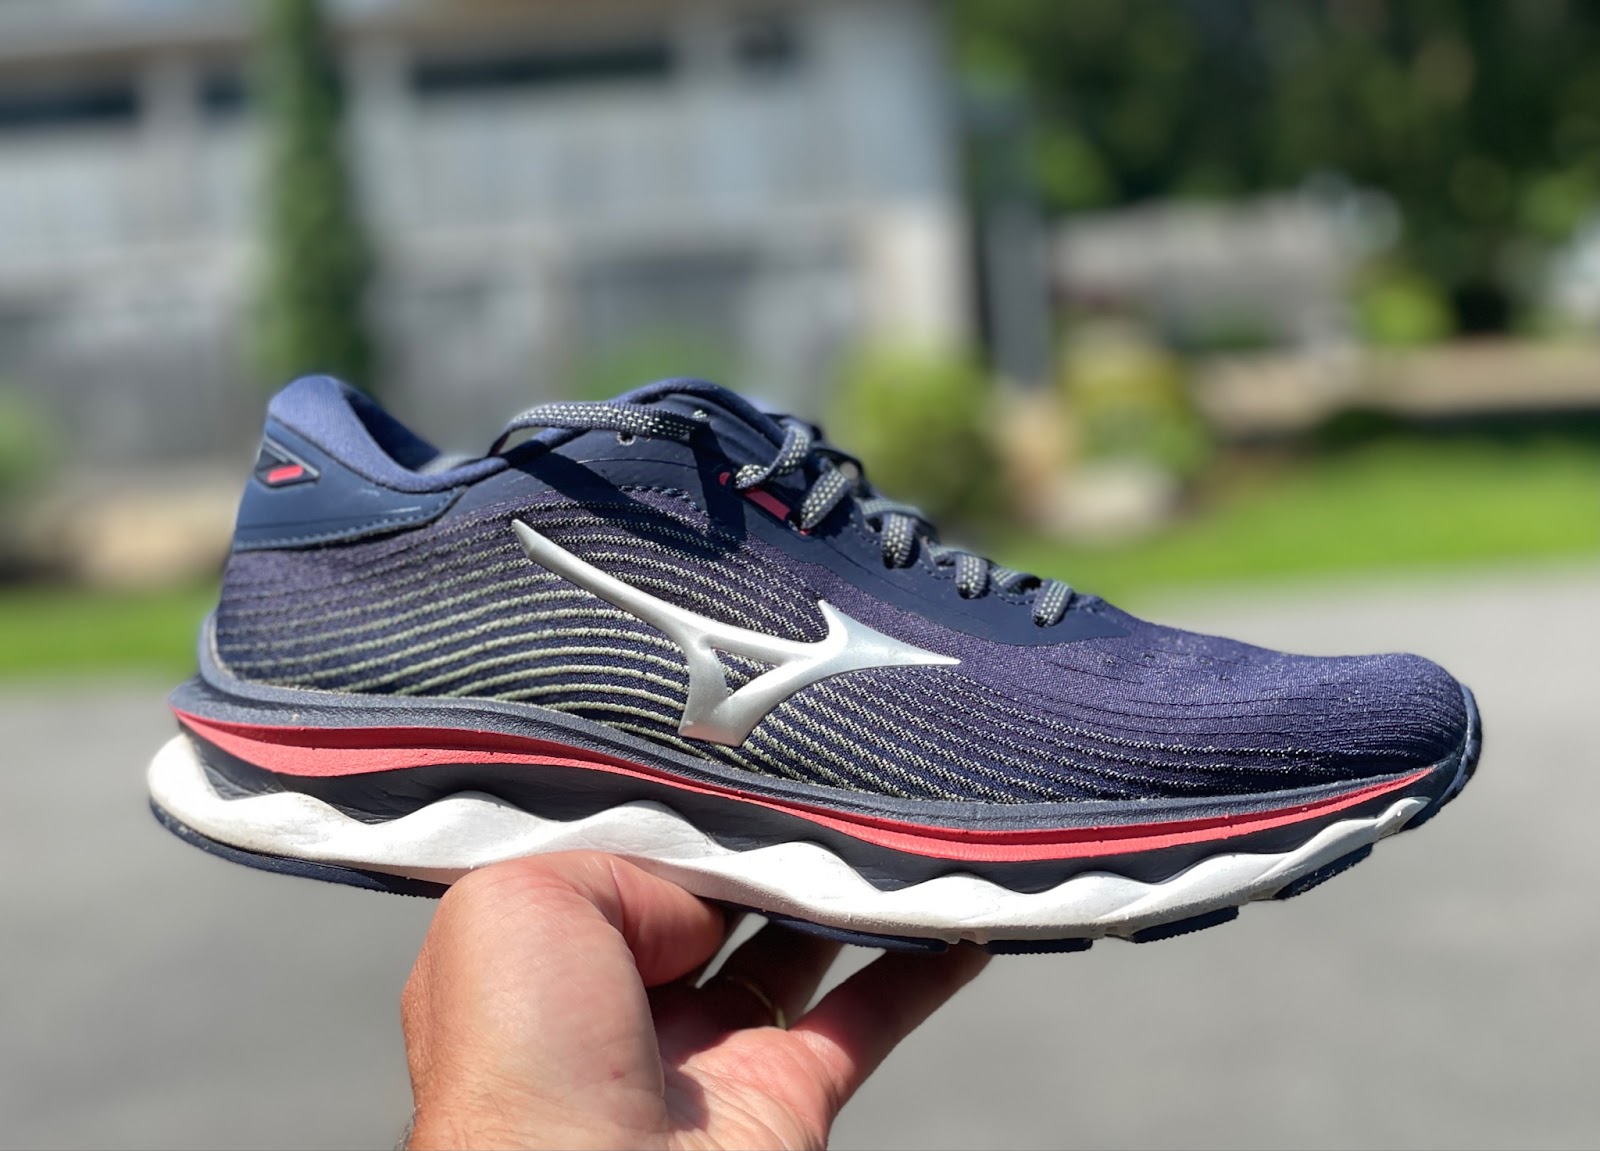 The 5 keys of the Mizuno Wave Sky 7 to make it your daily training